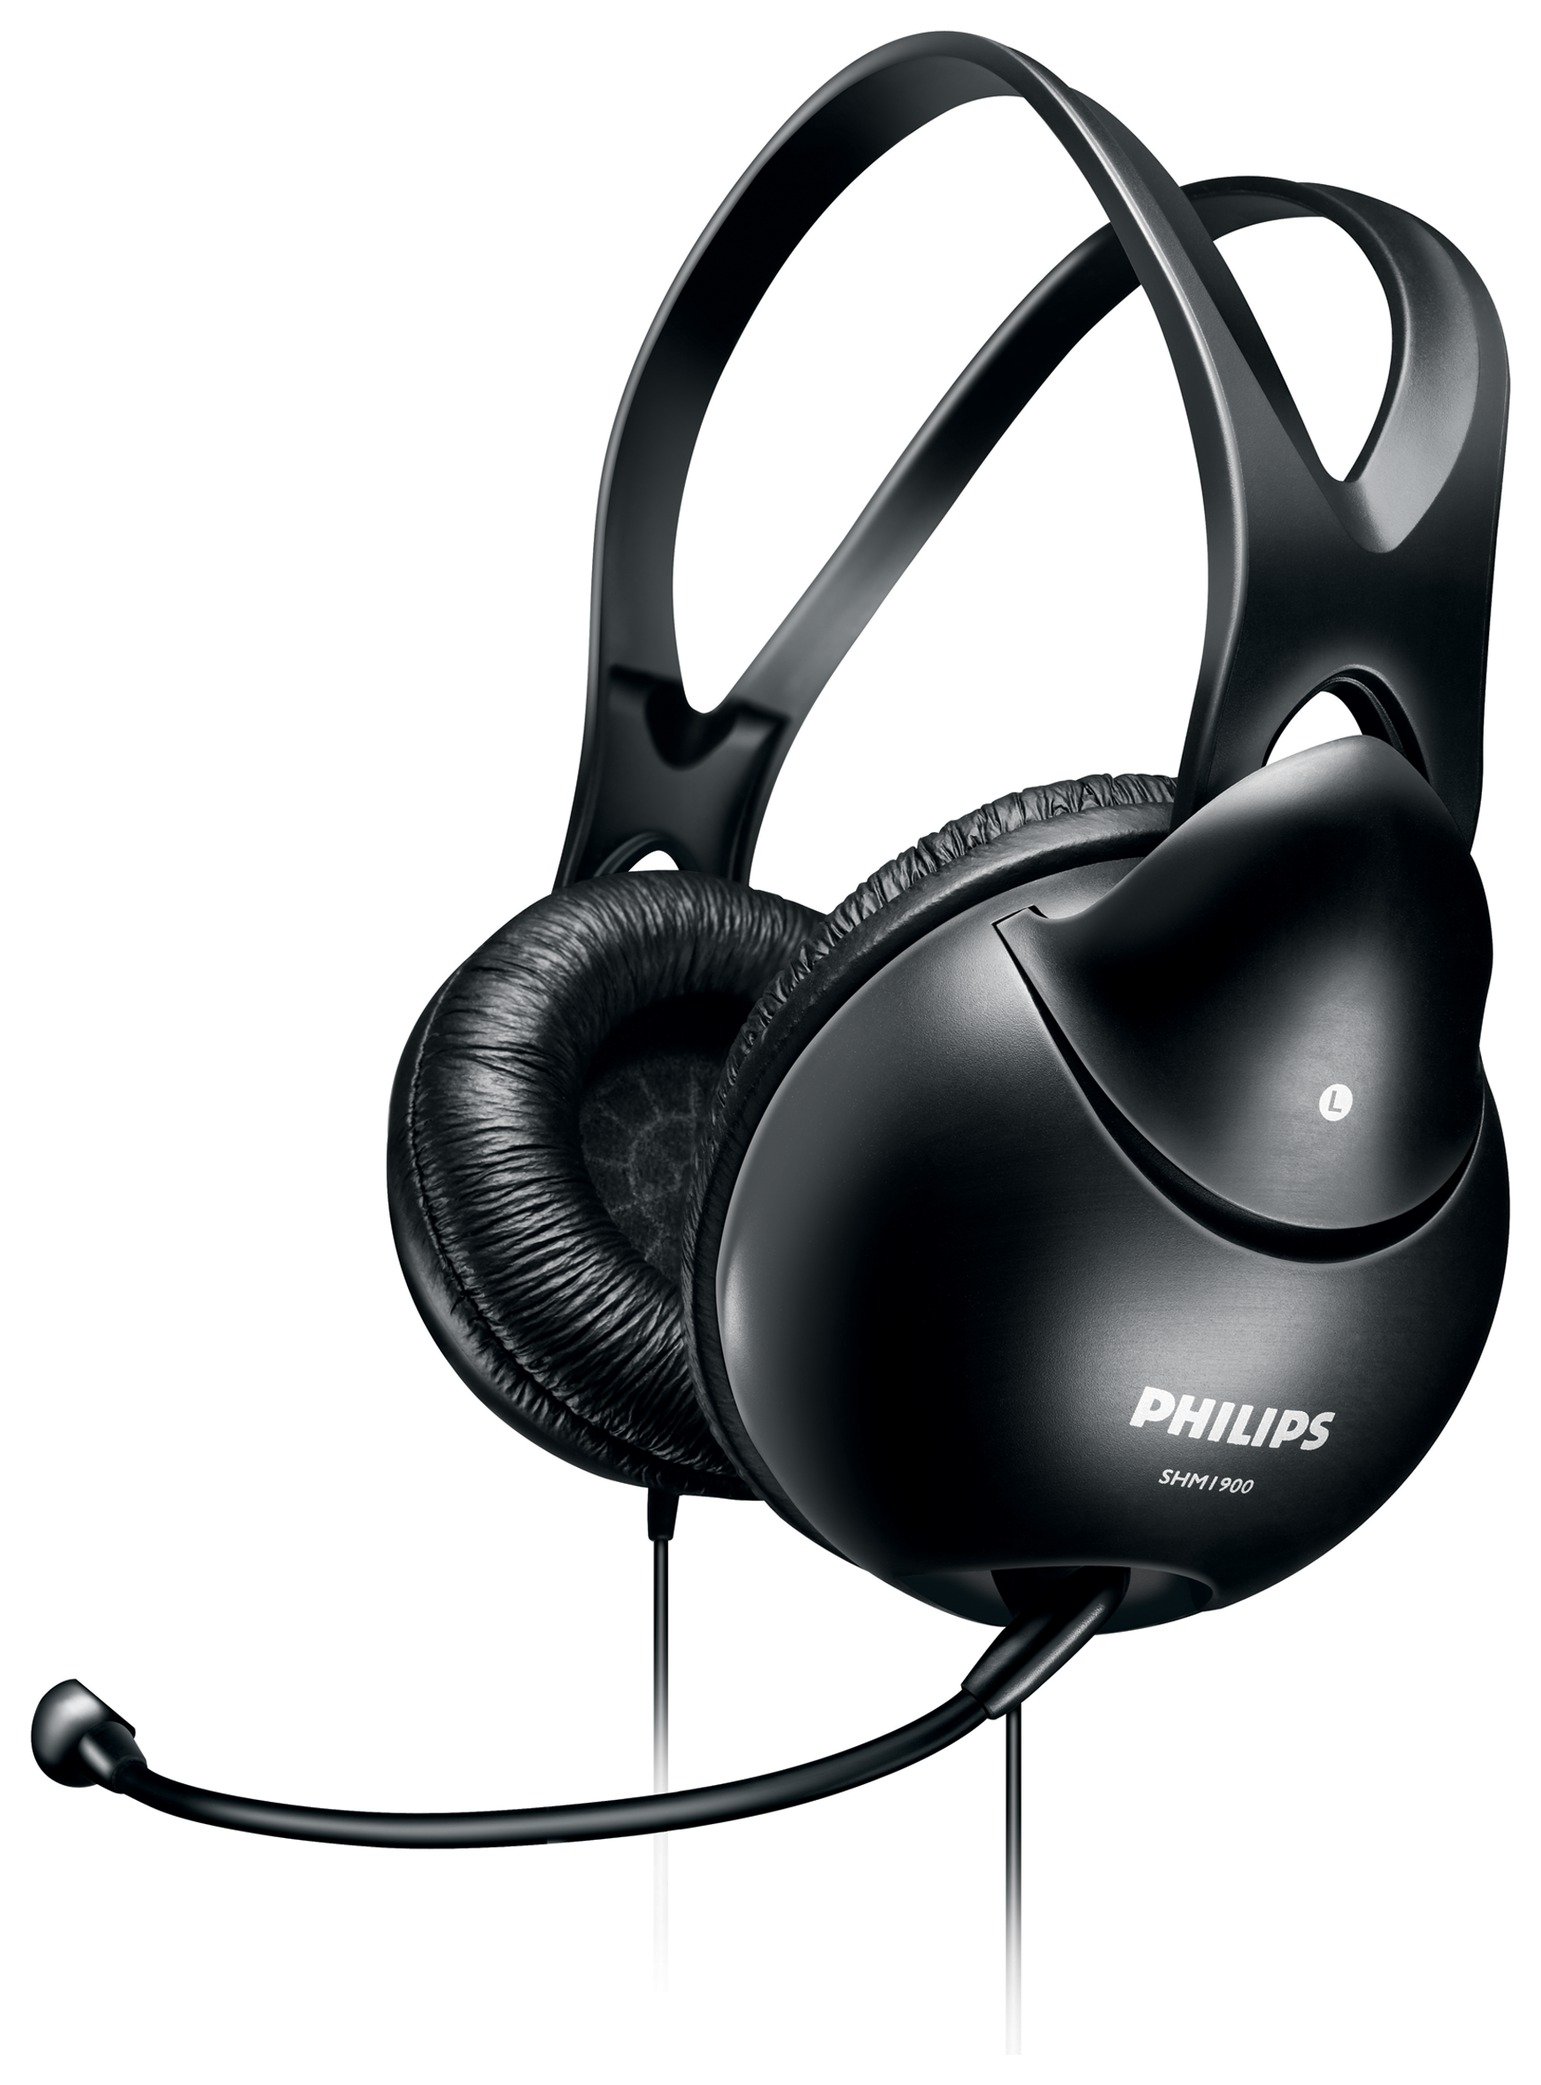 Philips SHM1900/00 Over-Ear Headset for PC